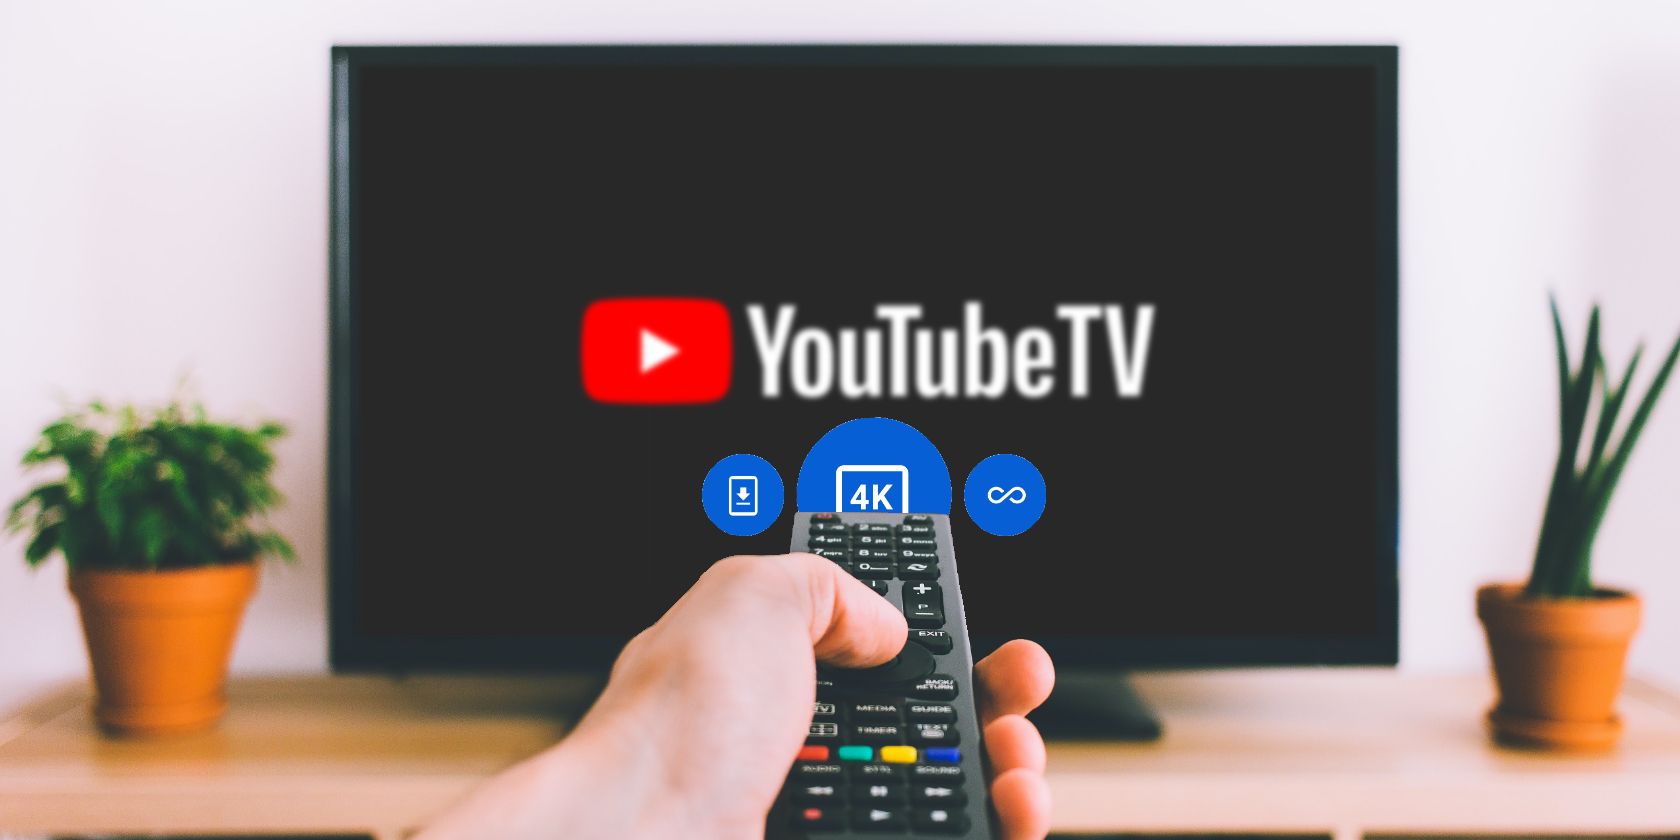 The YouTube TV app being used with a remote on a smart TV, highlighting icons for the new 4K Plus package.